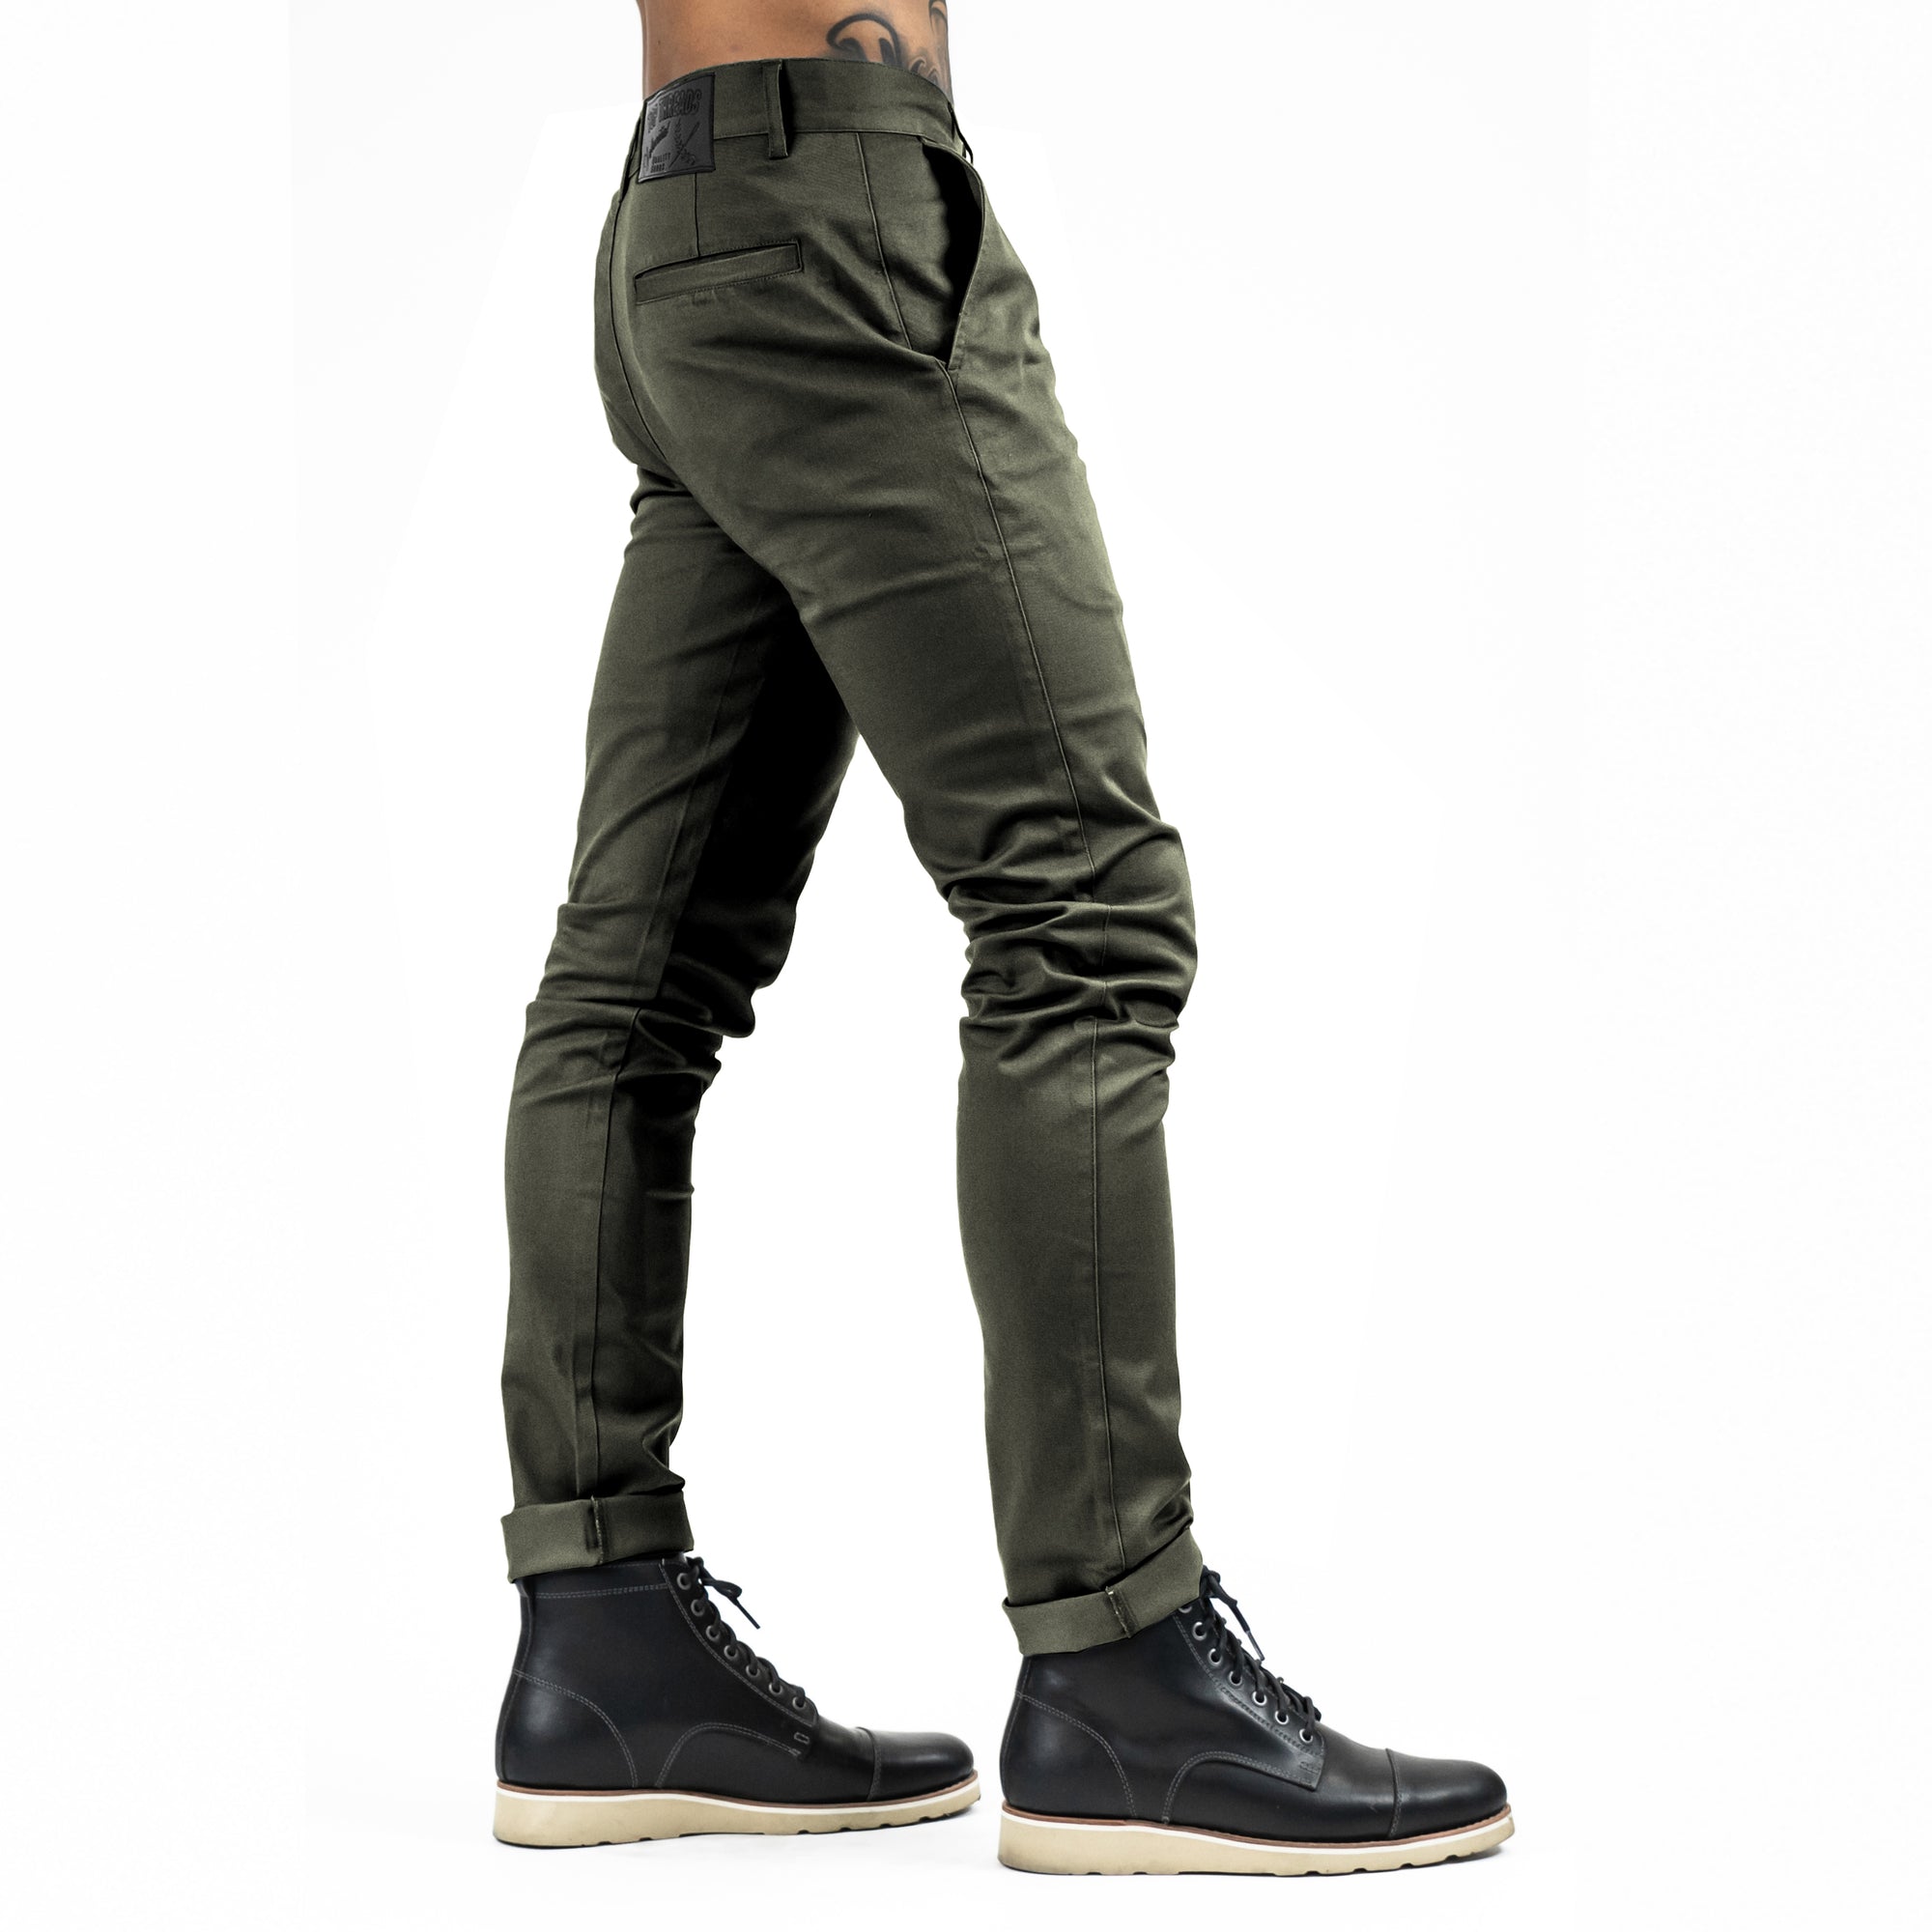 OFFICER Slim fit chino pant in a textured dobby comfort stretch - OLIVE